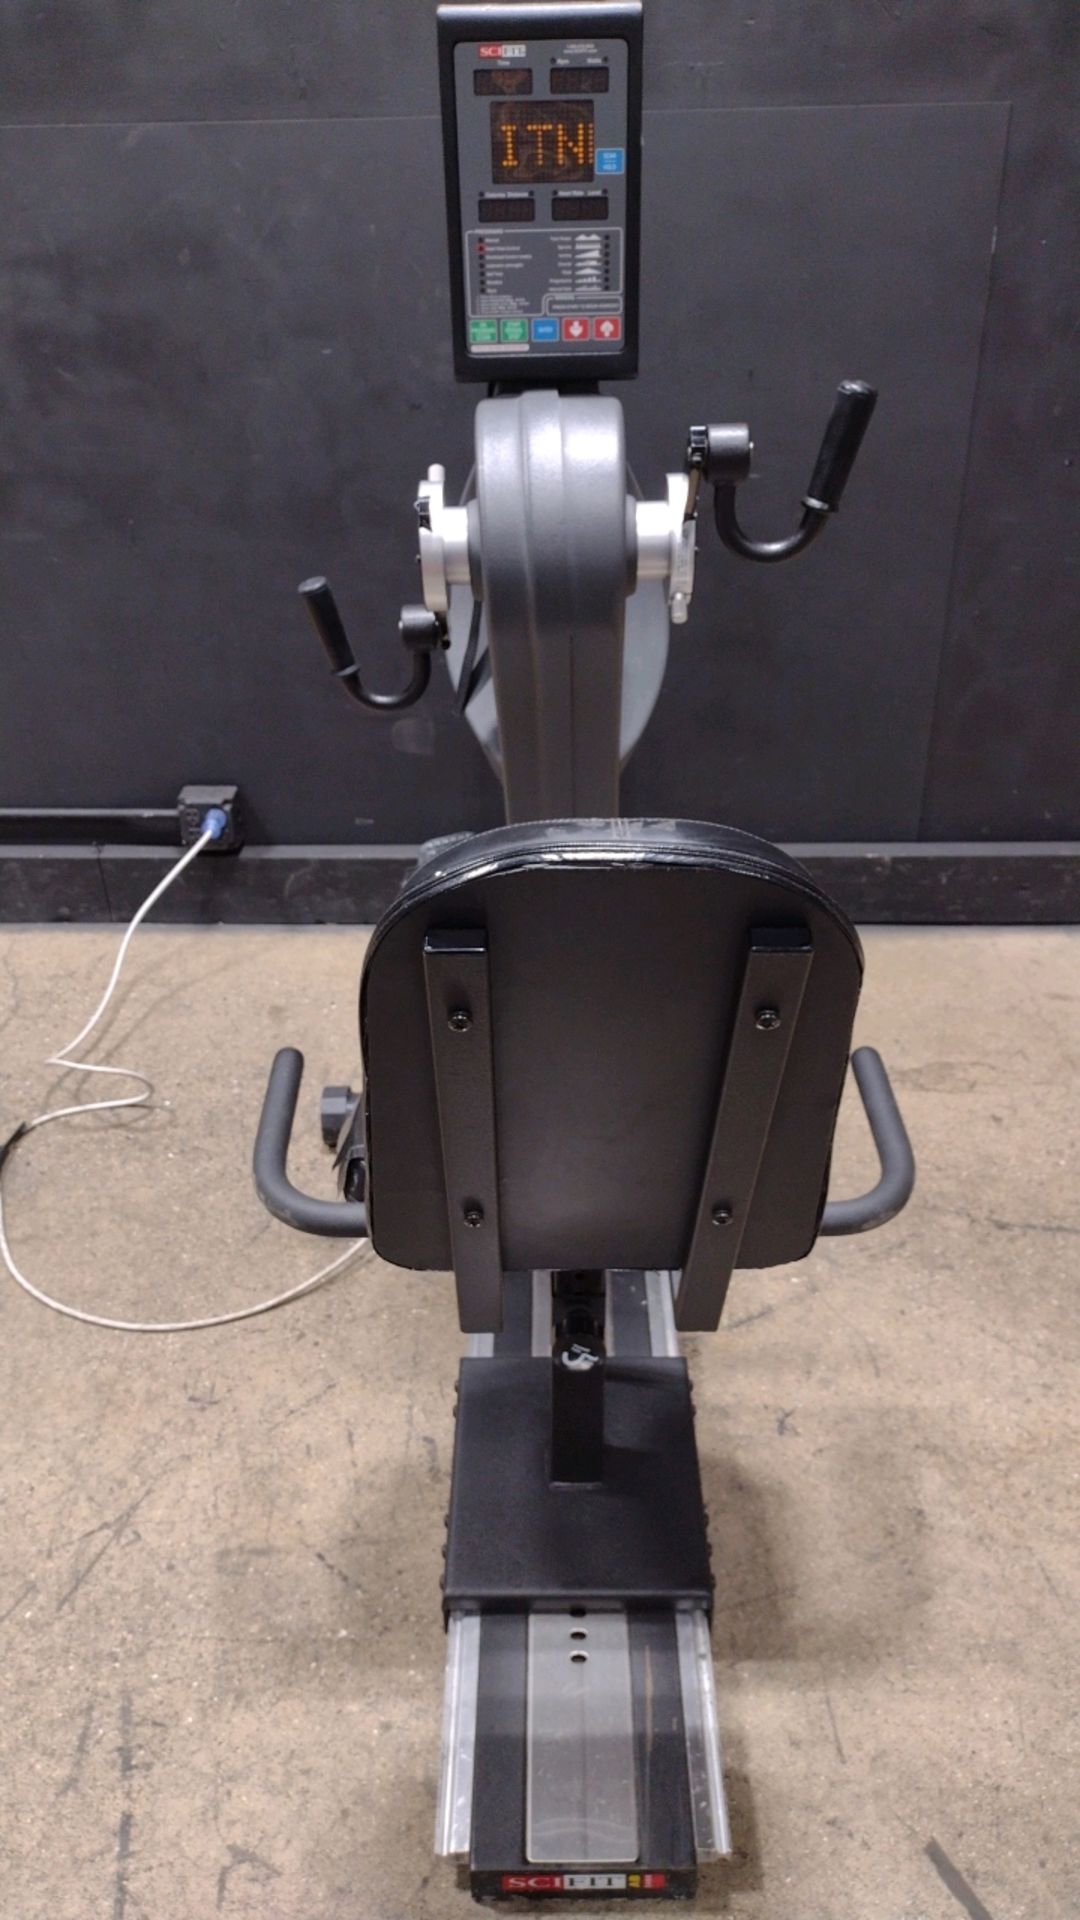 SCIFIT PRO II ERGOMETER (LOCATED AT 3325 MOUNT PROSPECT ROAD, FRANKLIN PARK, IL, 60131) - Image 4 of 4